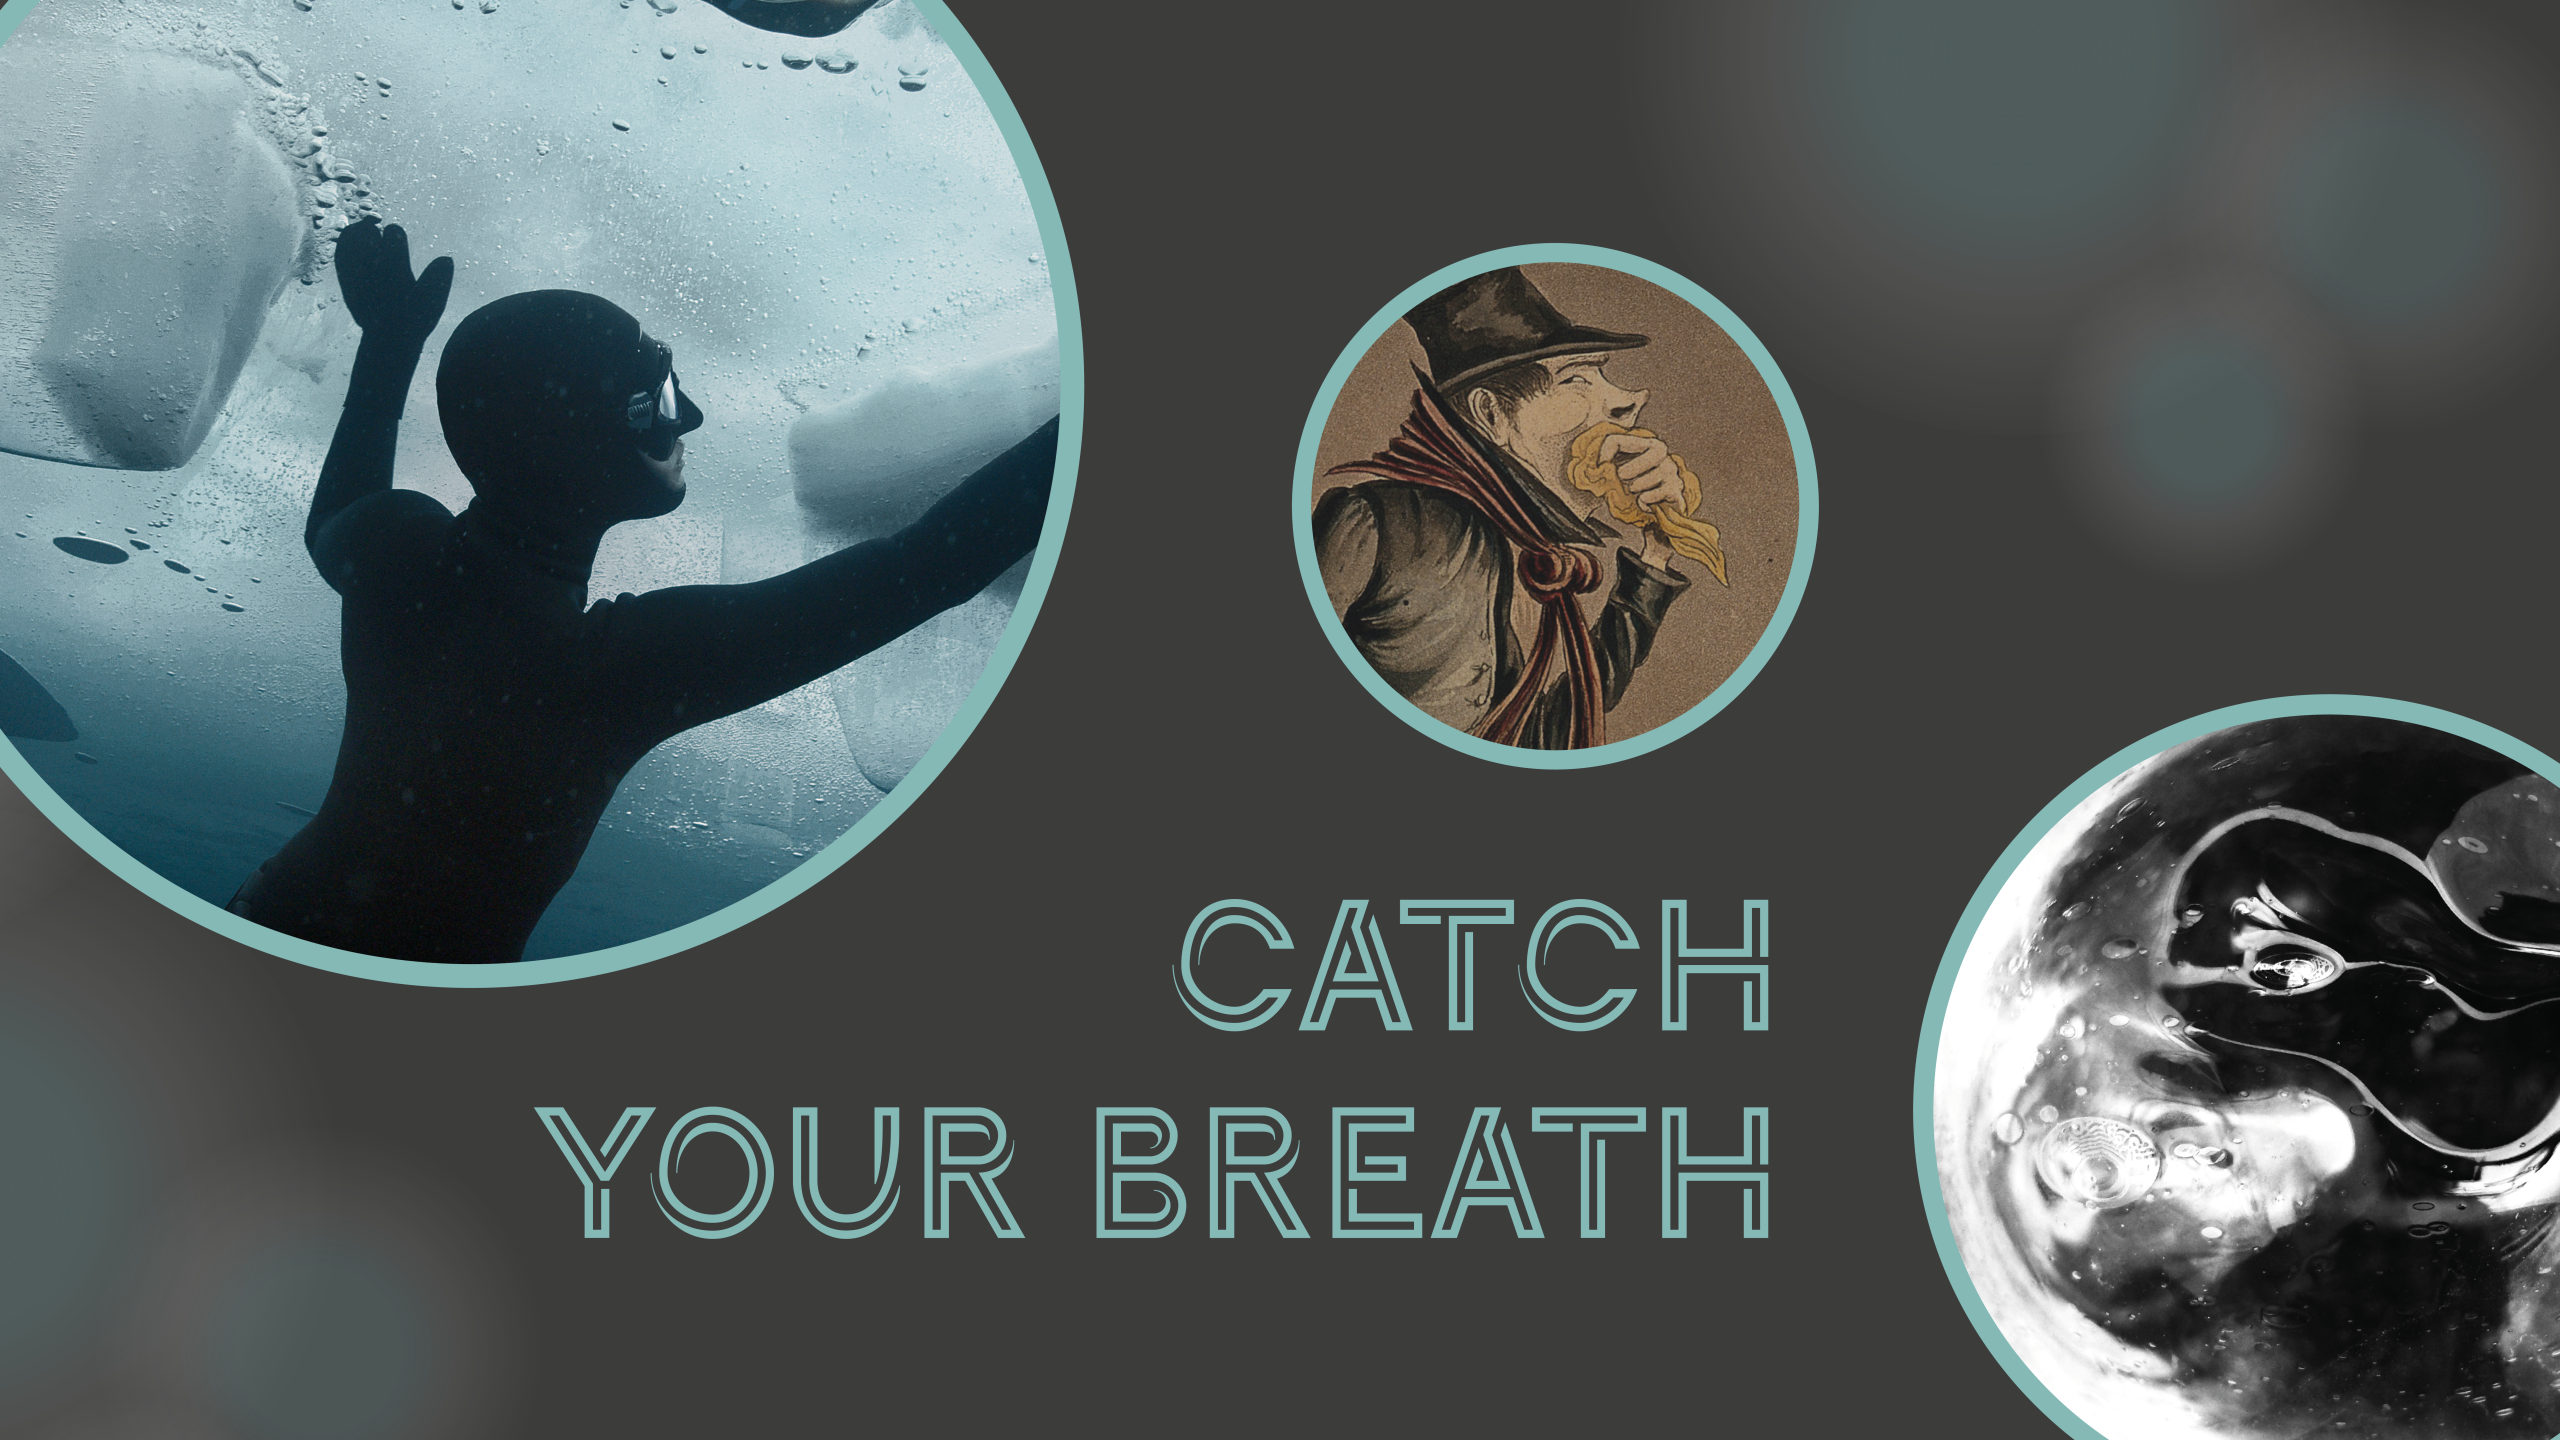 Catch Your Breath exhibition logo and images including a diver underwater, a Victorian man holding a handkerchief to his nose and a glass blown sculpture